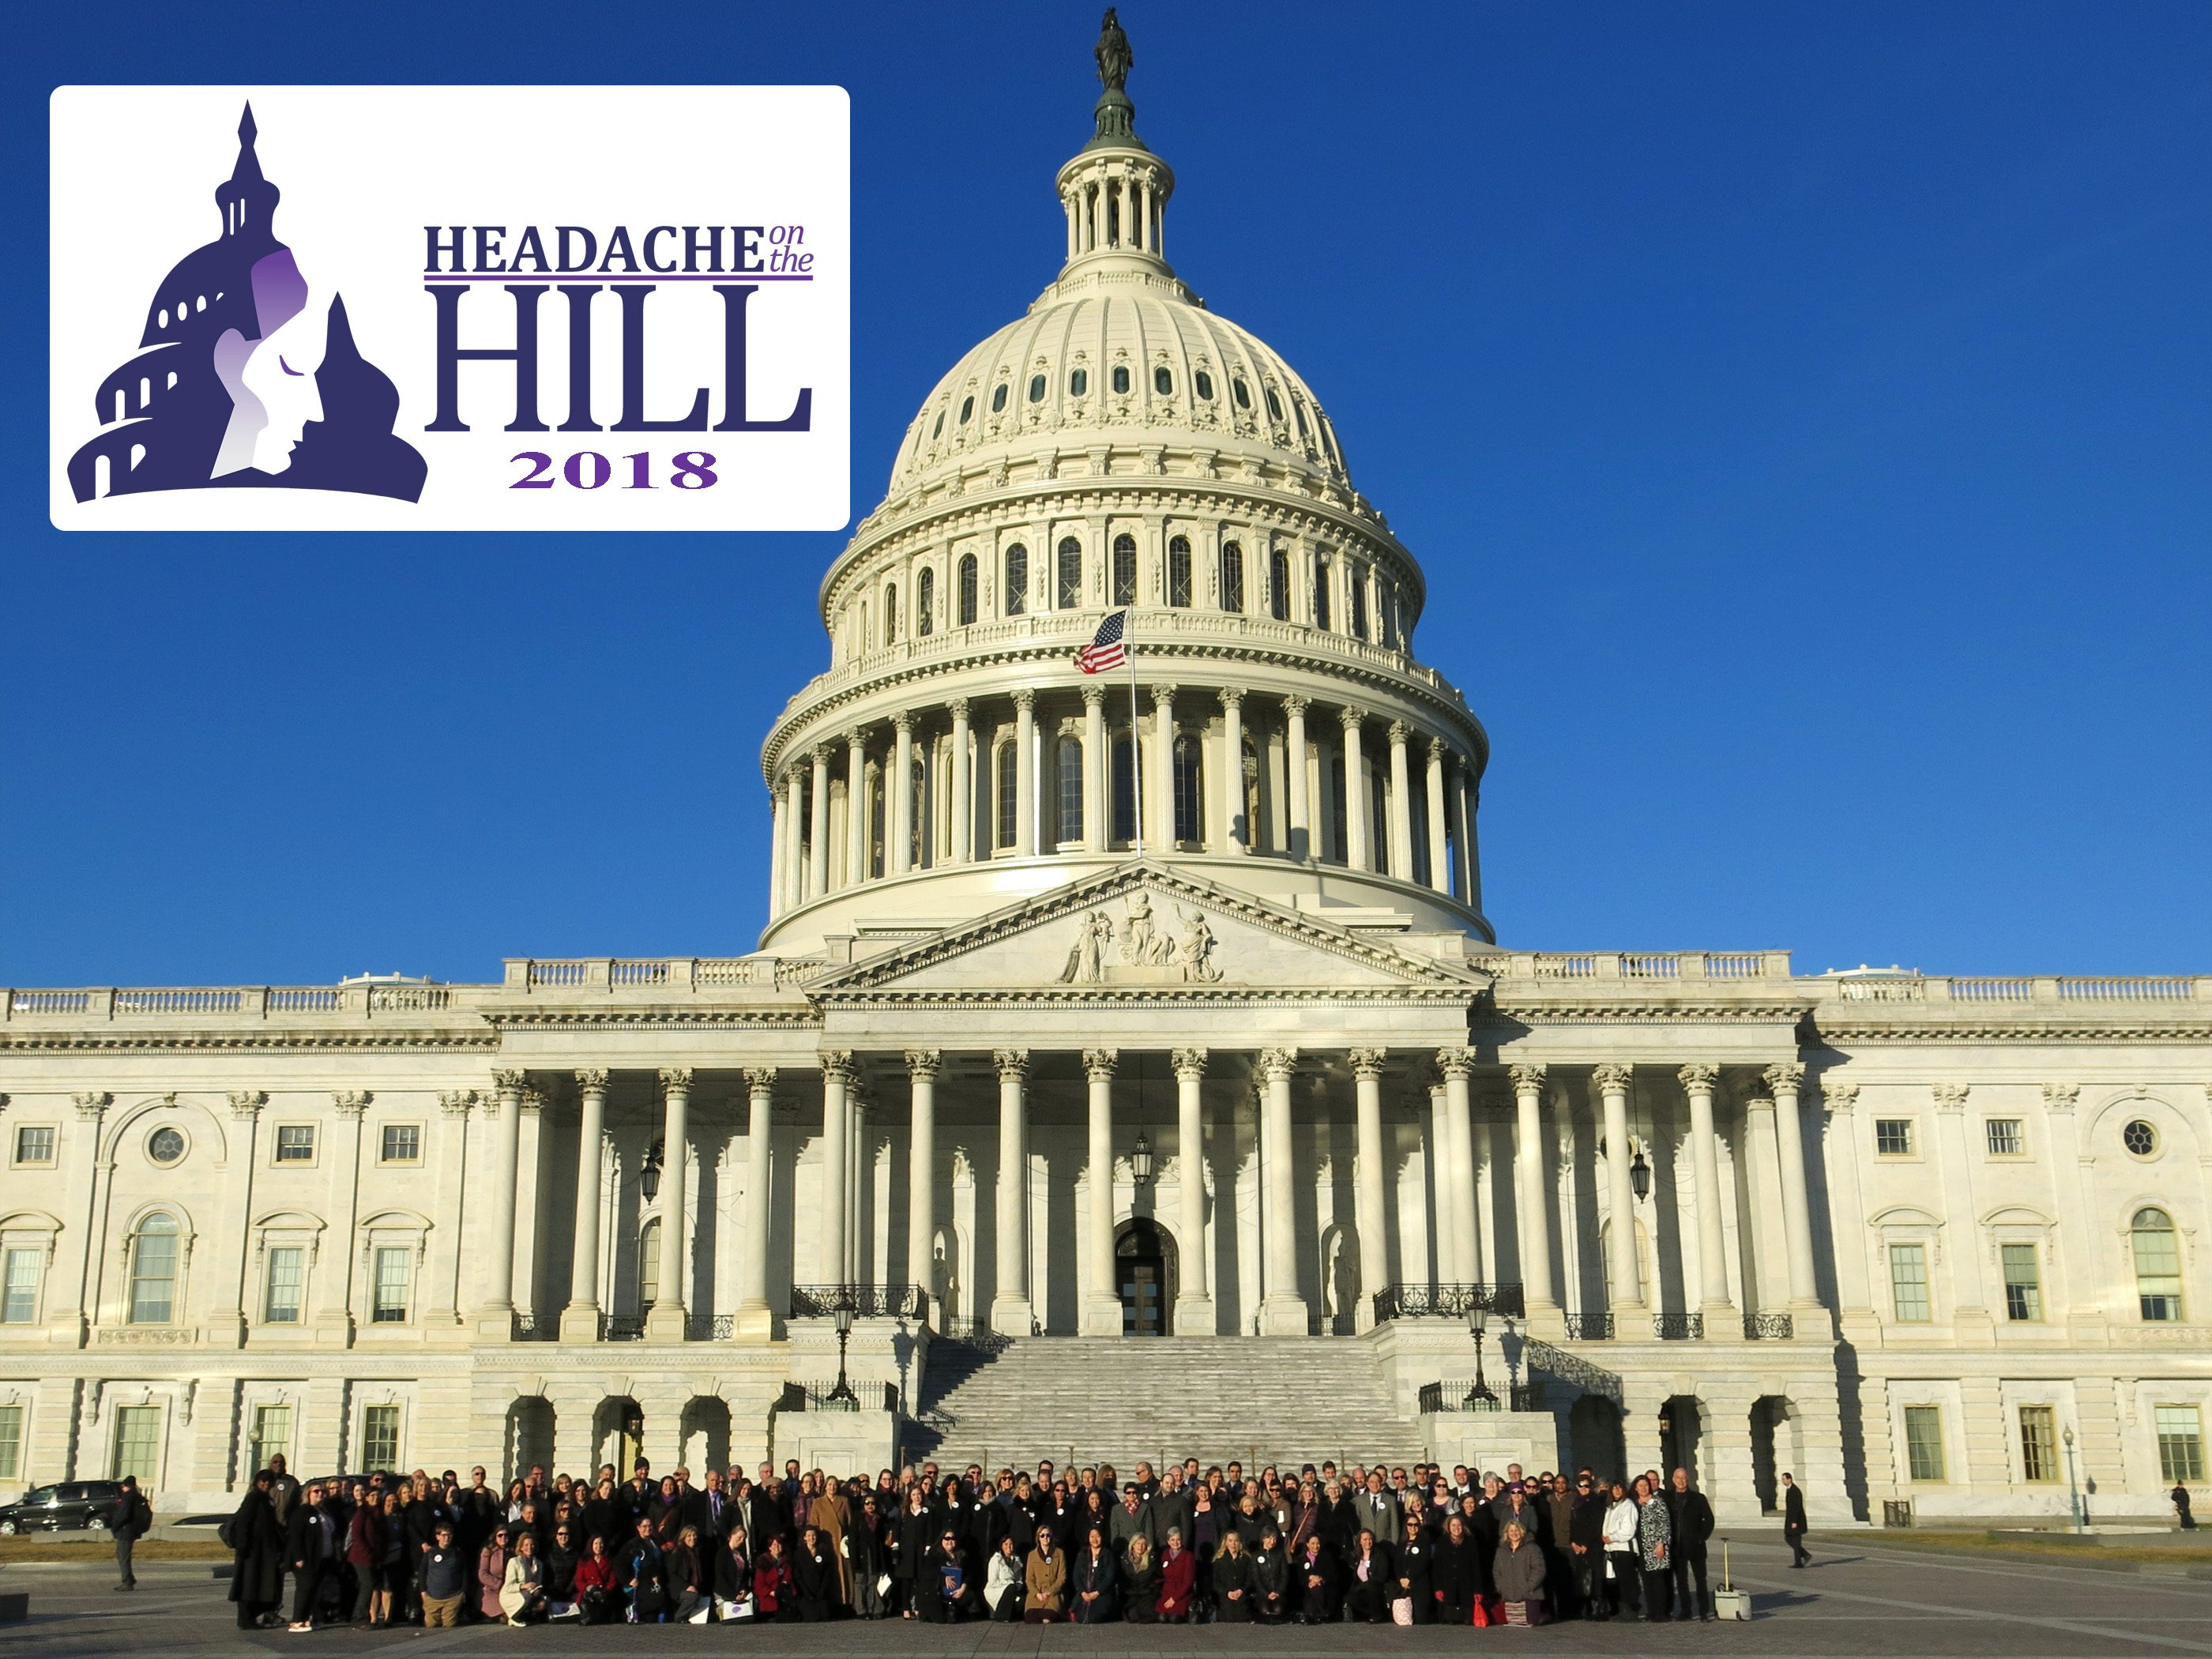 2018 Headache on the Hill participants in front of the U.S. Capitol.